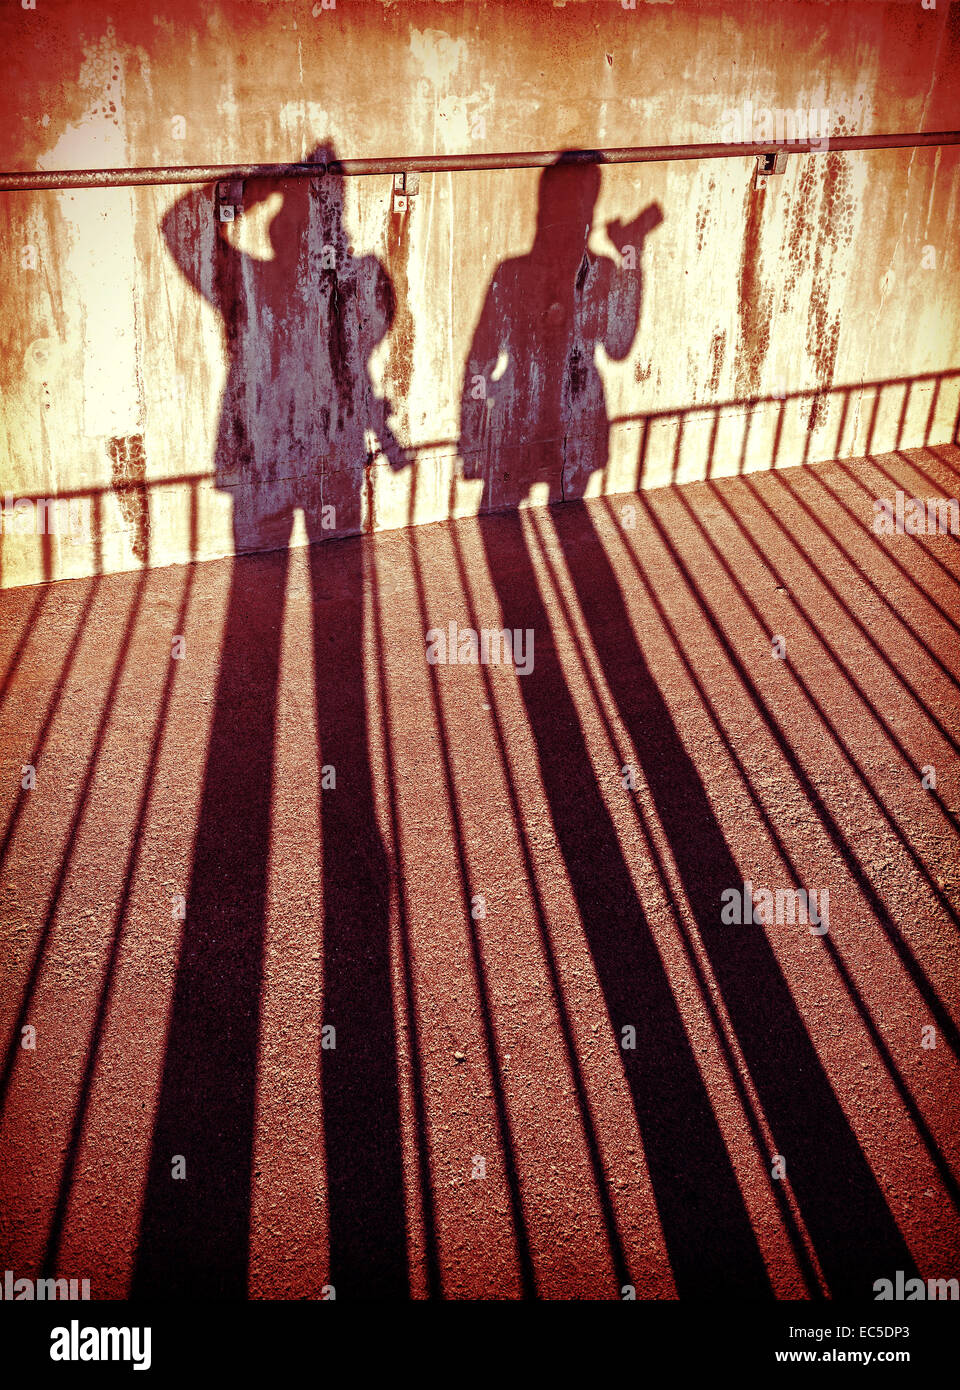 Concept picture of people with cameras shadows. Stock Photo